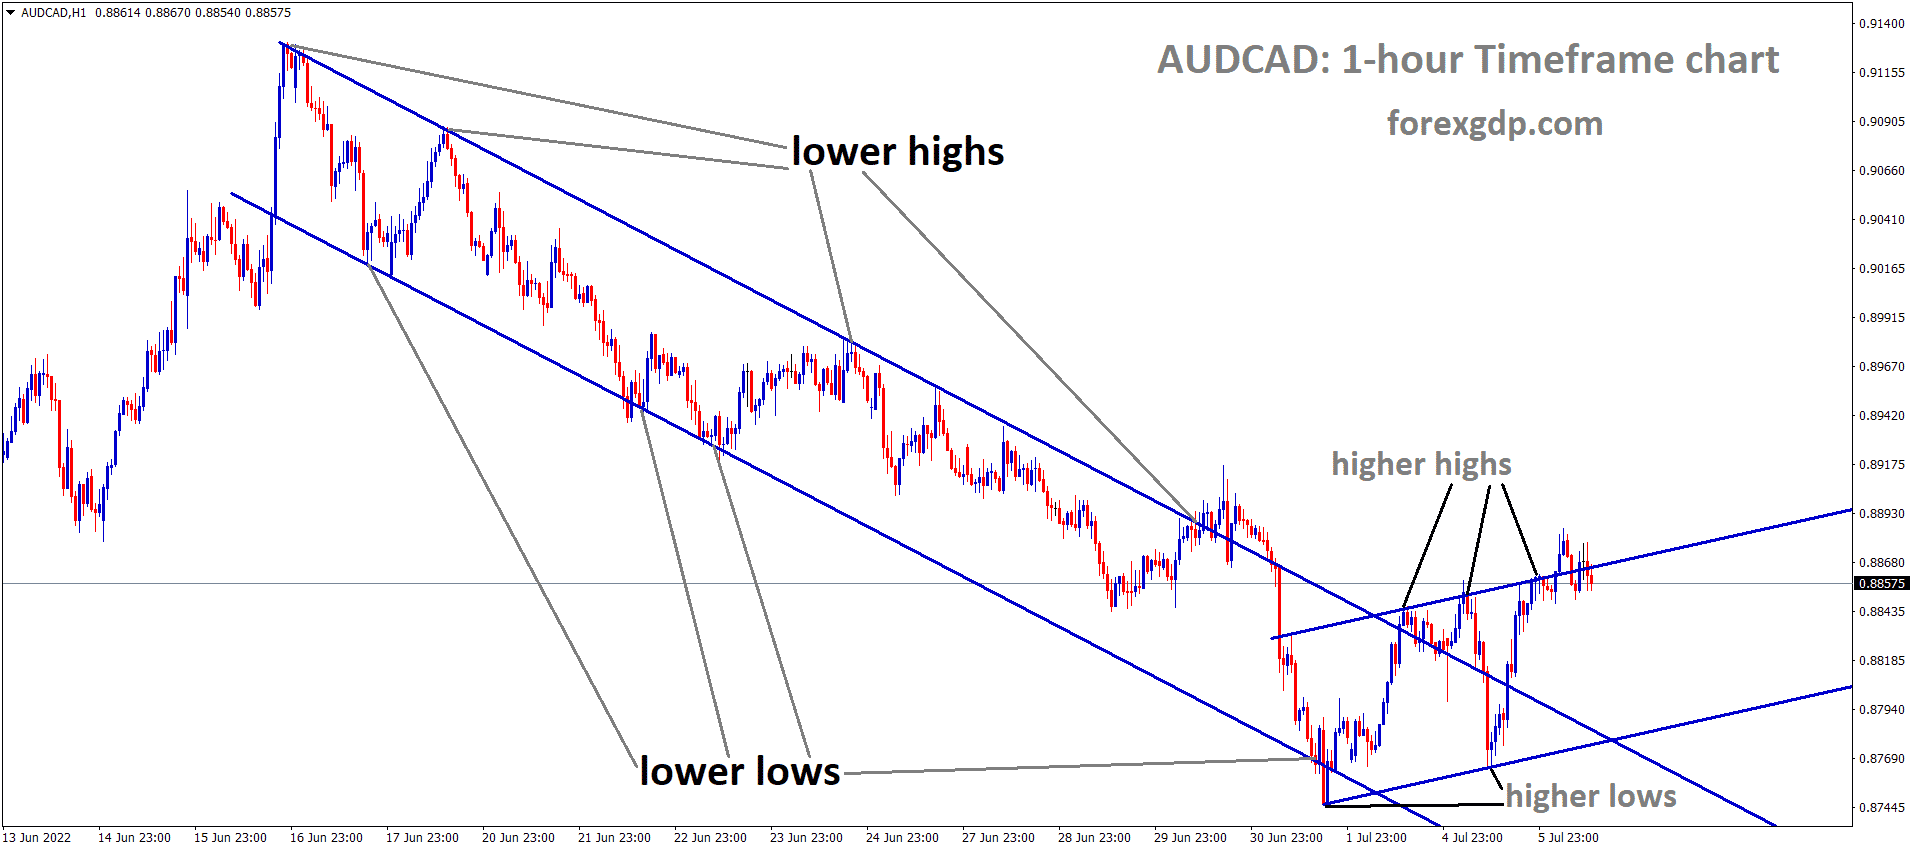 AUDCAD has broken the Descending channel and the Market has reached the higher high area of the Ascending channel.